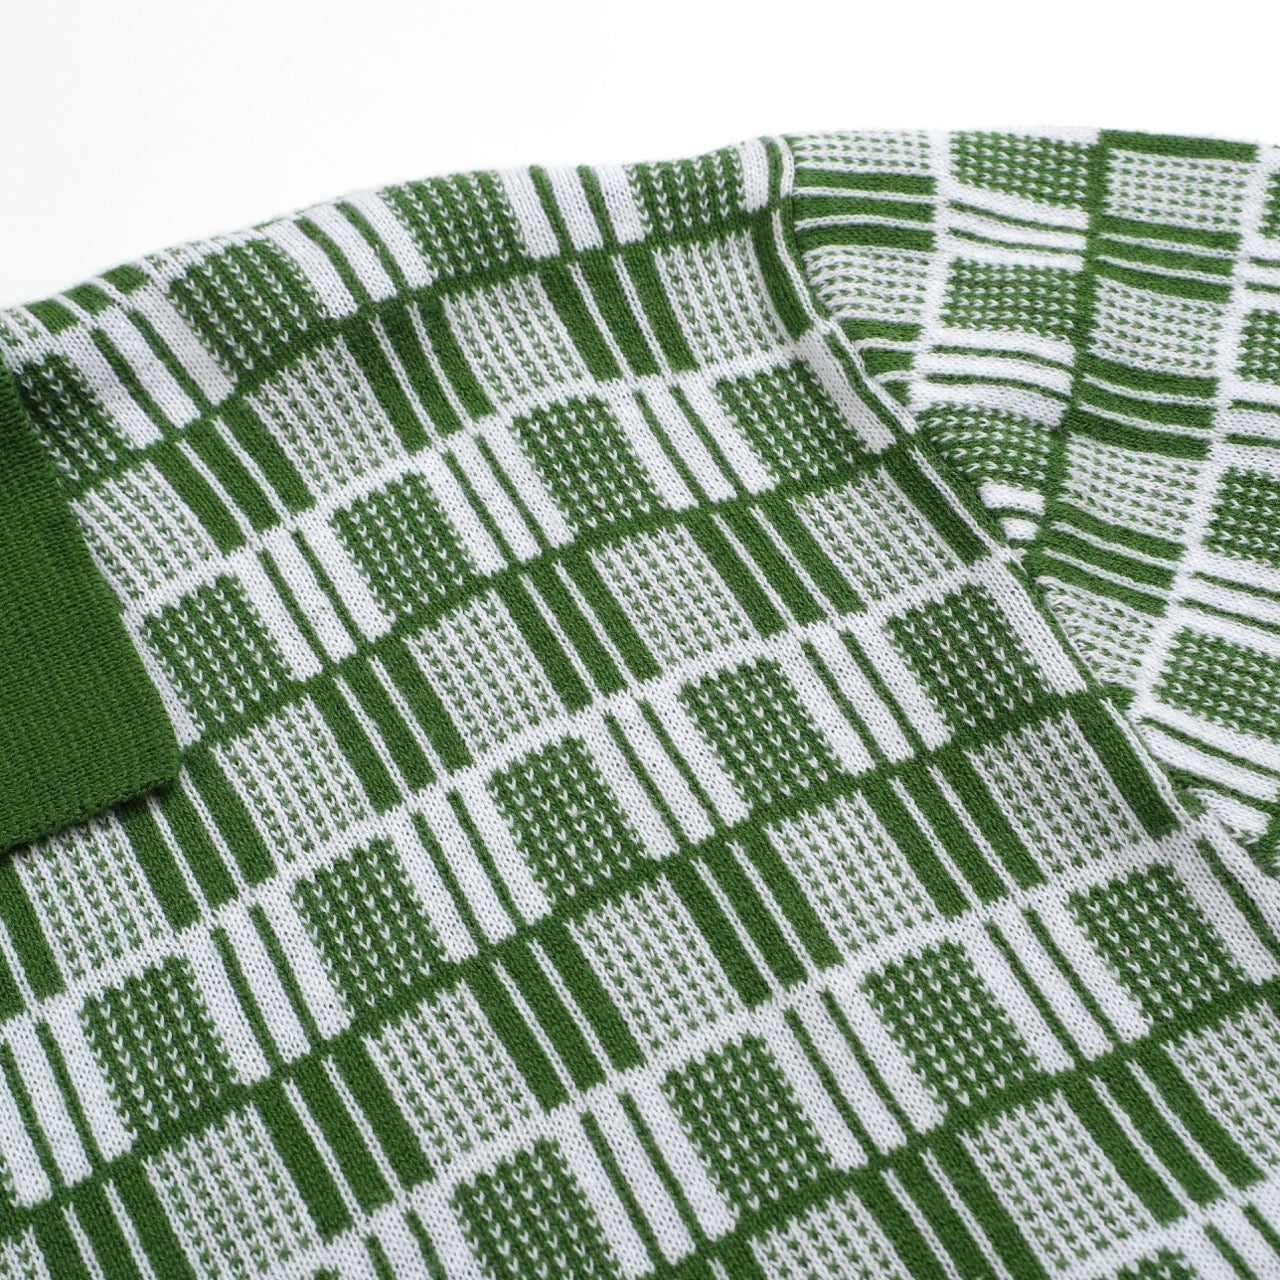 Men's Green Knitted Polo With Jacquard Panel